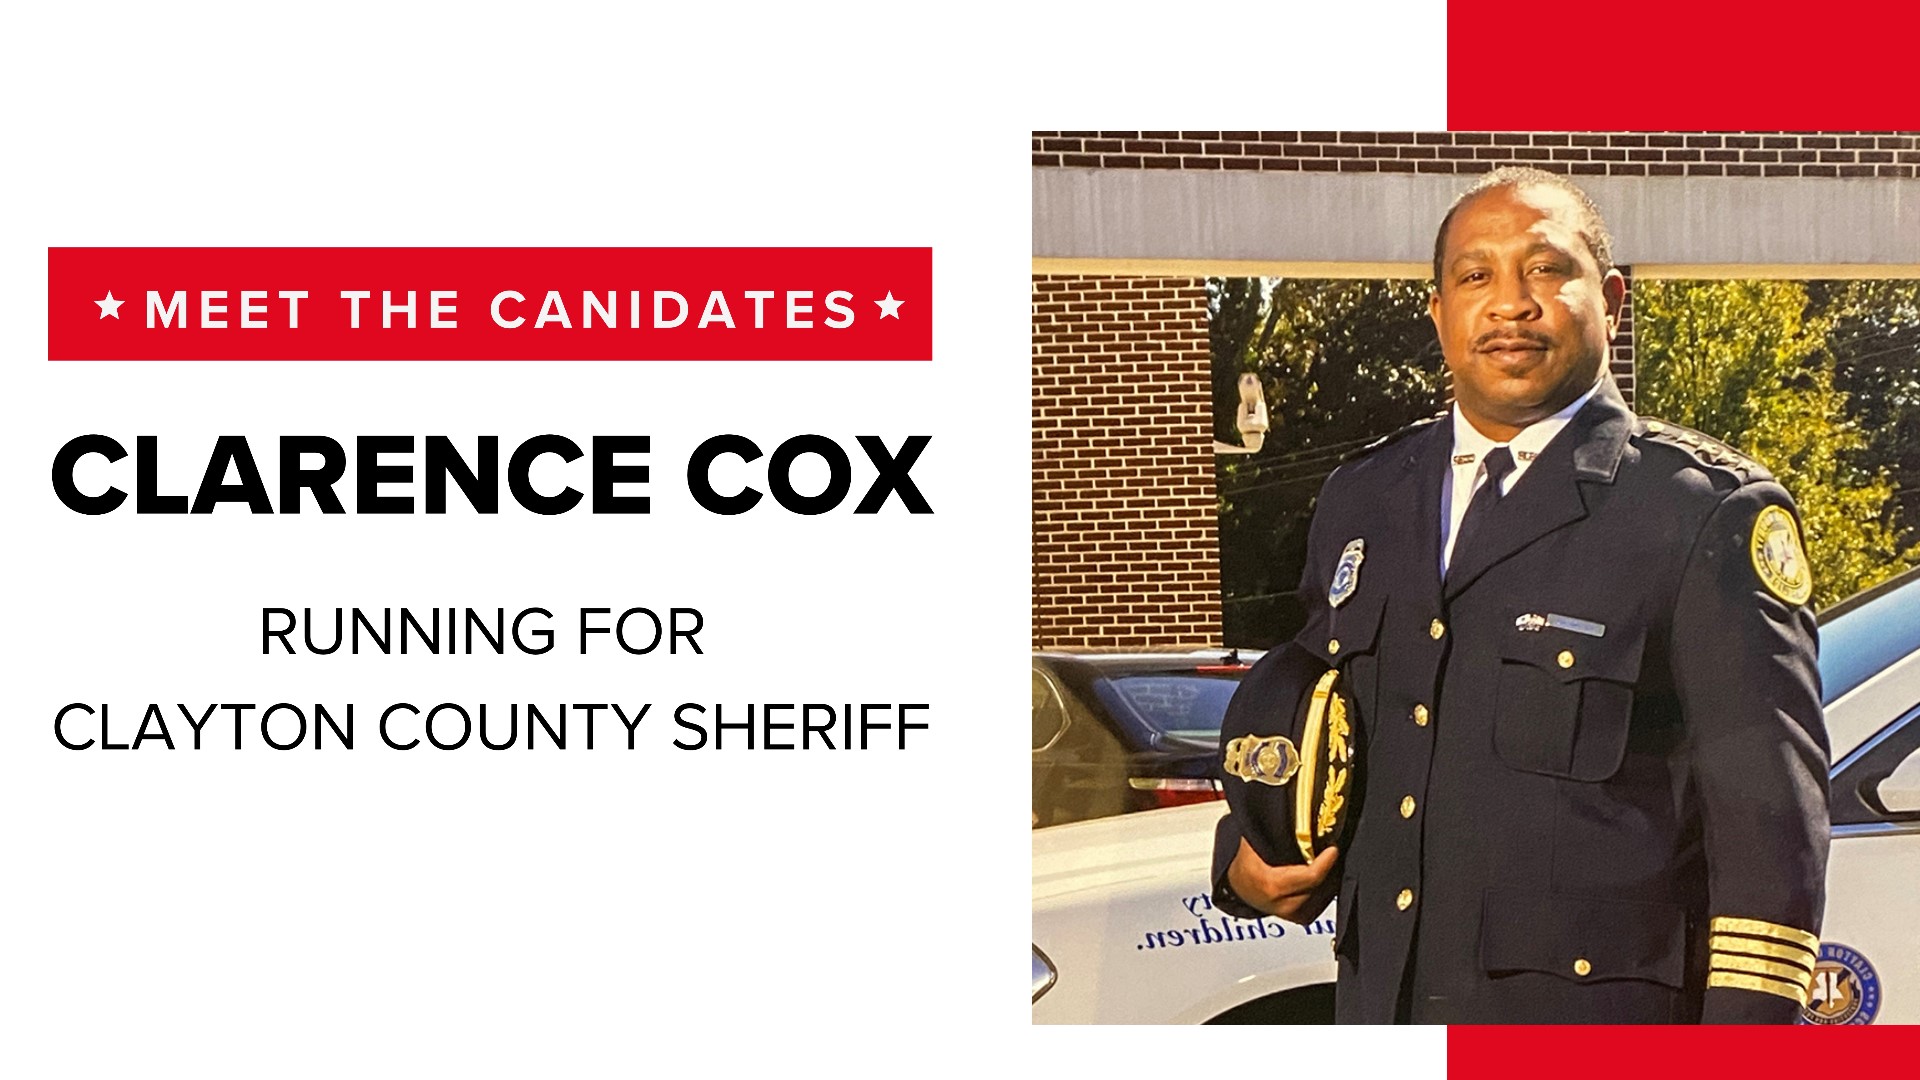 Law enforcement veteran Clarence Cox is one of five candidates hoping to be Victor Hill's successor.